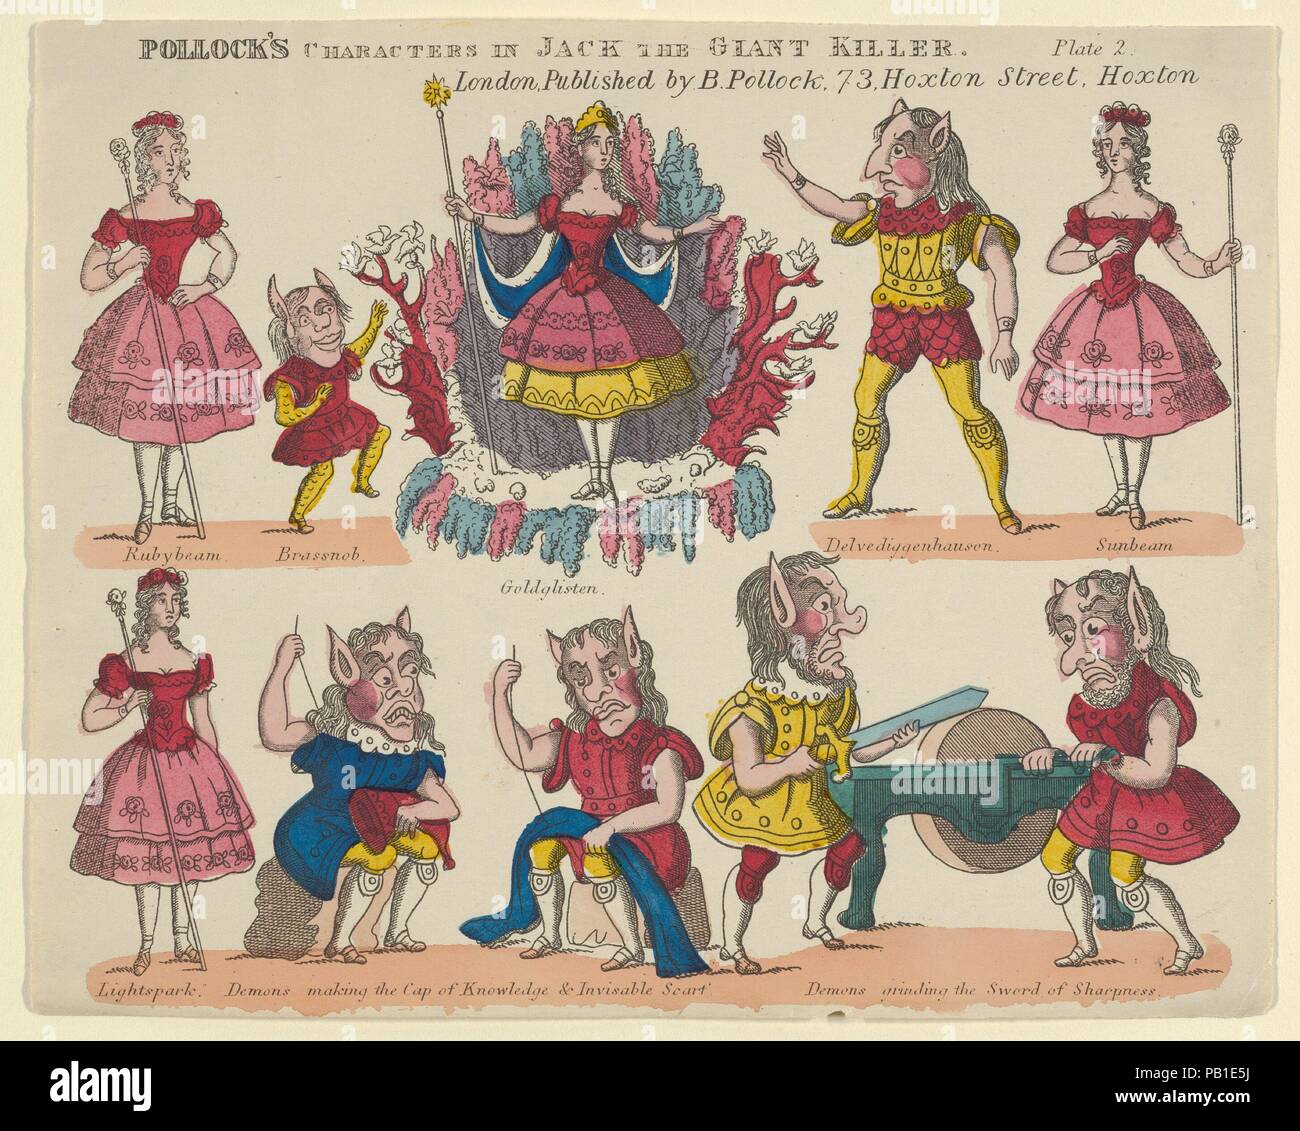 Characters, from 'Jack the Giant Killer', Plate 2 for a Toy Theater. Dimensions: Sheet: 6 11/16 × 8 7/16 in. (17 × 21.4 cm). Publisher: Benjamin Pollock (British, 1857-1937). Date: 1870-90.  Pollock's characters for 'Jack the Giant Killer', second plate for a toy theater. A traditional fairy tale in England, it tells the story of Jack, who climbs his way up to the round table of King Arthur by killing the various giants that menace the lives and happiness of people in the reign. The print features ten characters of the story, organized in two rows of five. On the upper row, in the center, is G Stock Photo